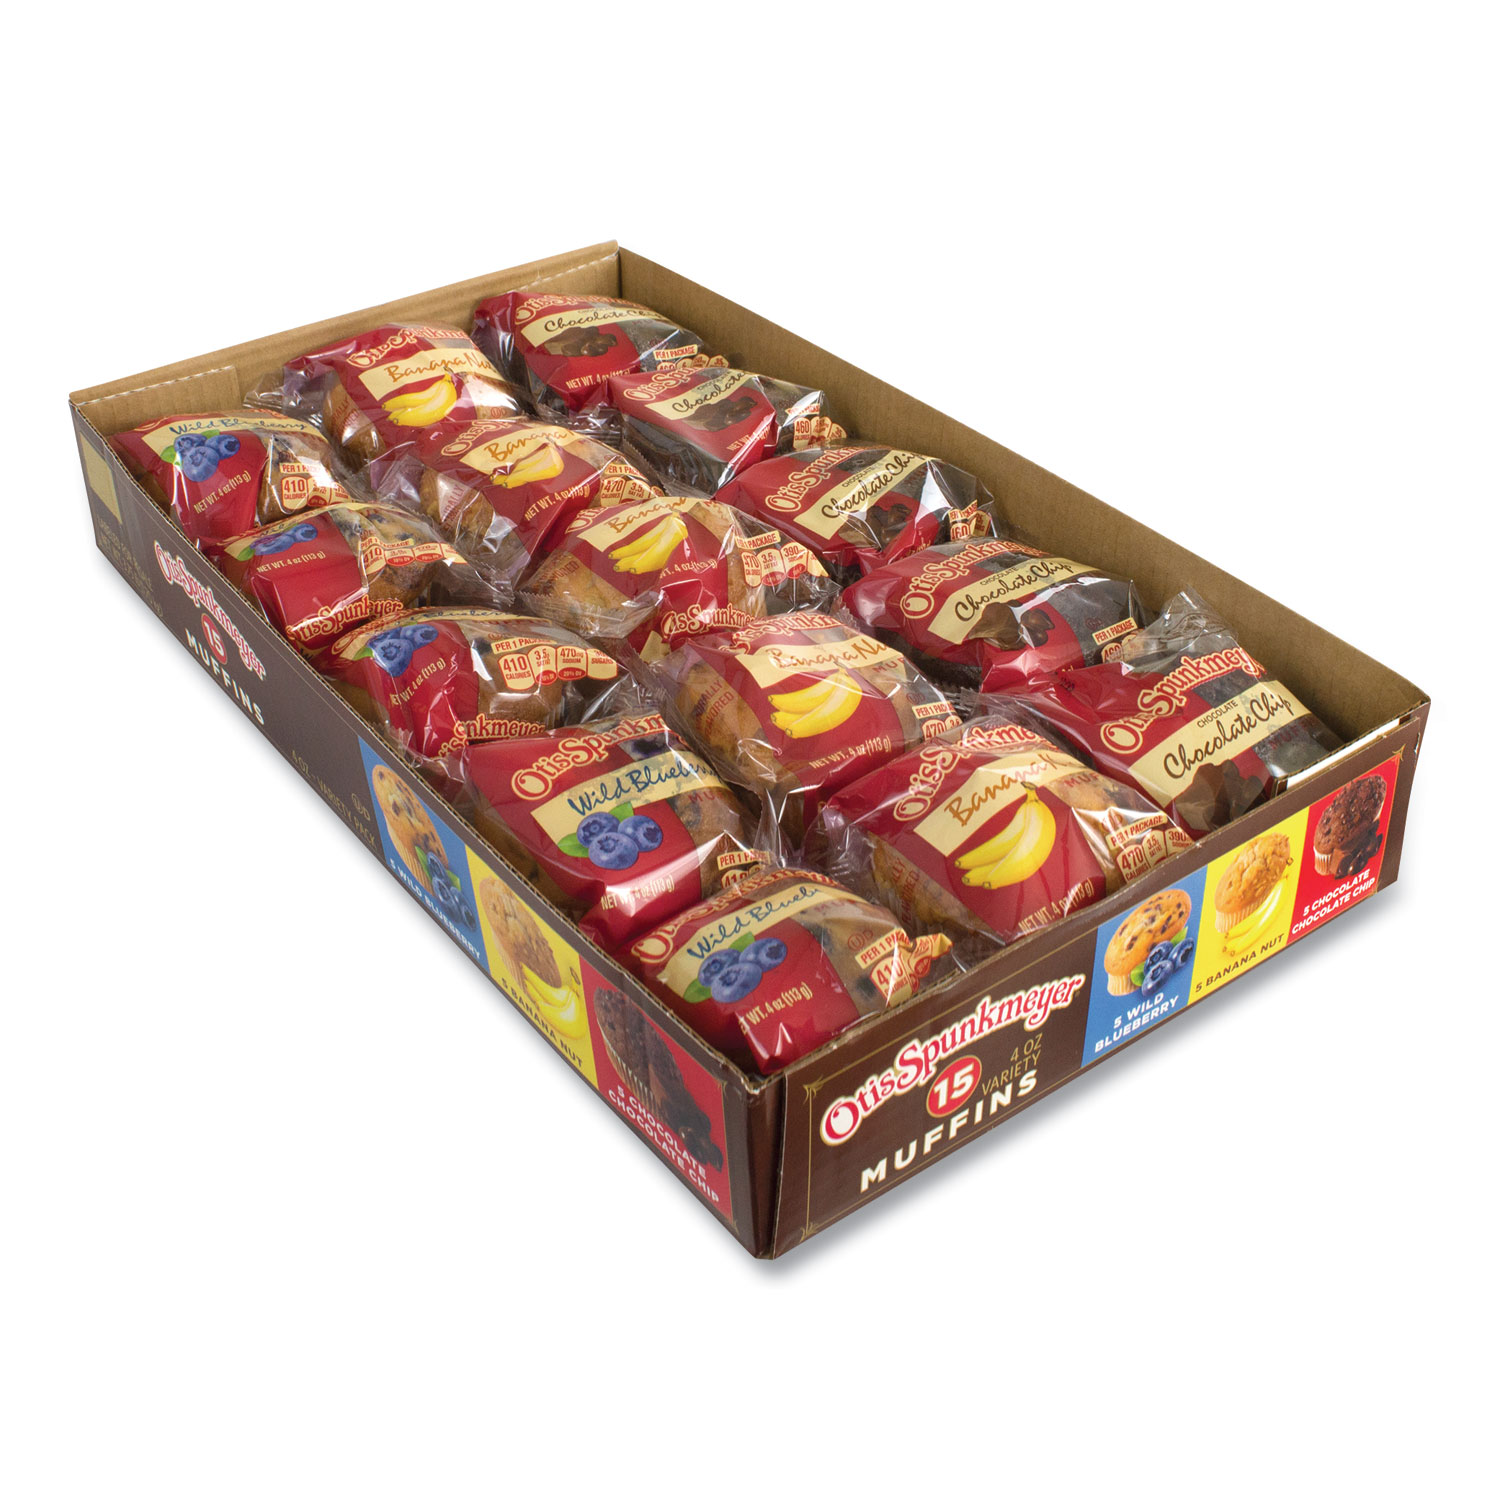 Otis Spunkmeyer® Muffins Variety Pack, Assorted Flavors, 4 oz Pack, 15 Packs/Box, Free Delivery in 1-4 Business Days